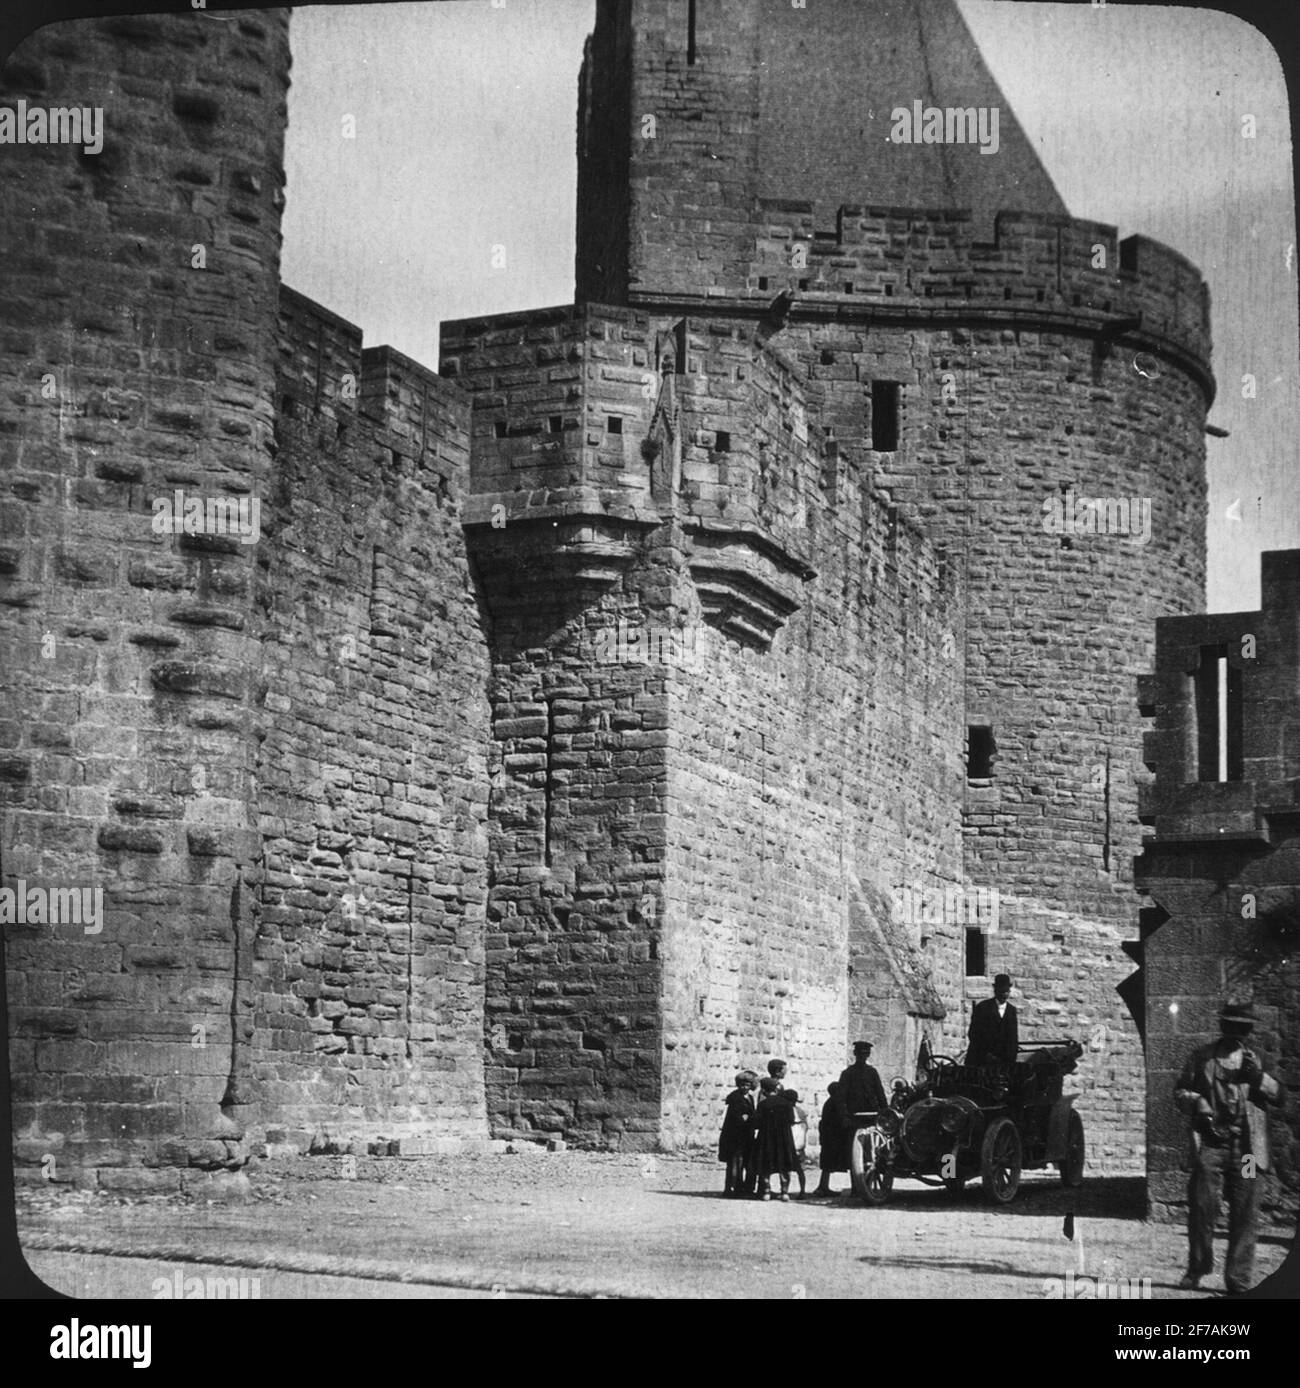 Skioptic image with motifs from medieval castle Cité de Carcassonne. The man at the far right is possibly Paul Clemen.The image has been stored in cardboard labeled: Höstesan 1907. Carcassonne.8. NO: 13. Stock Photo